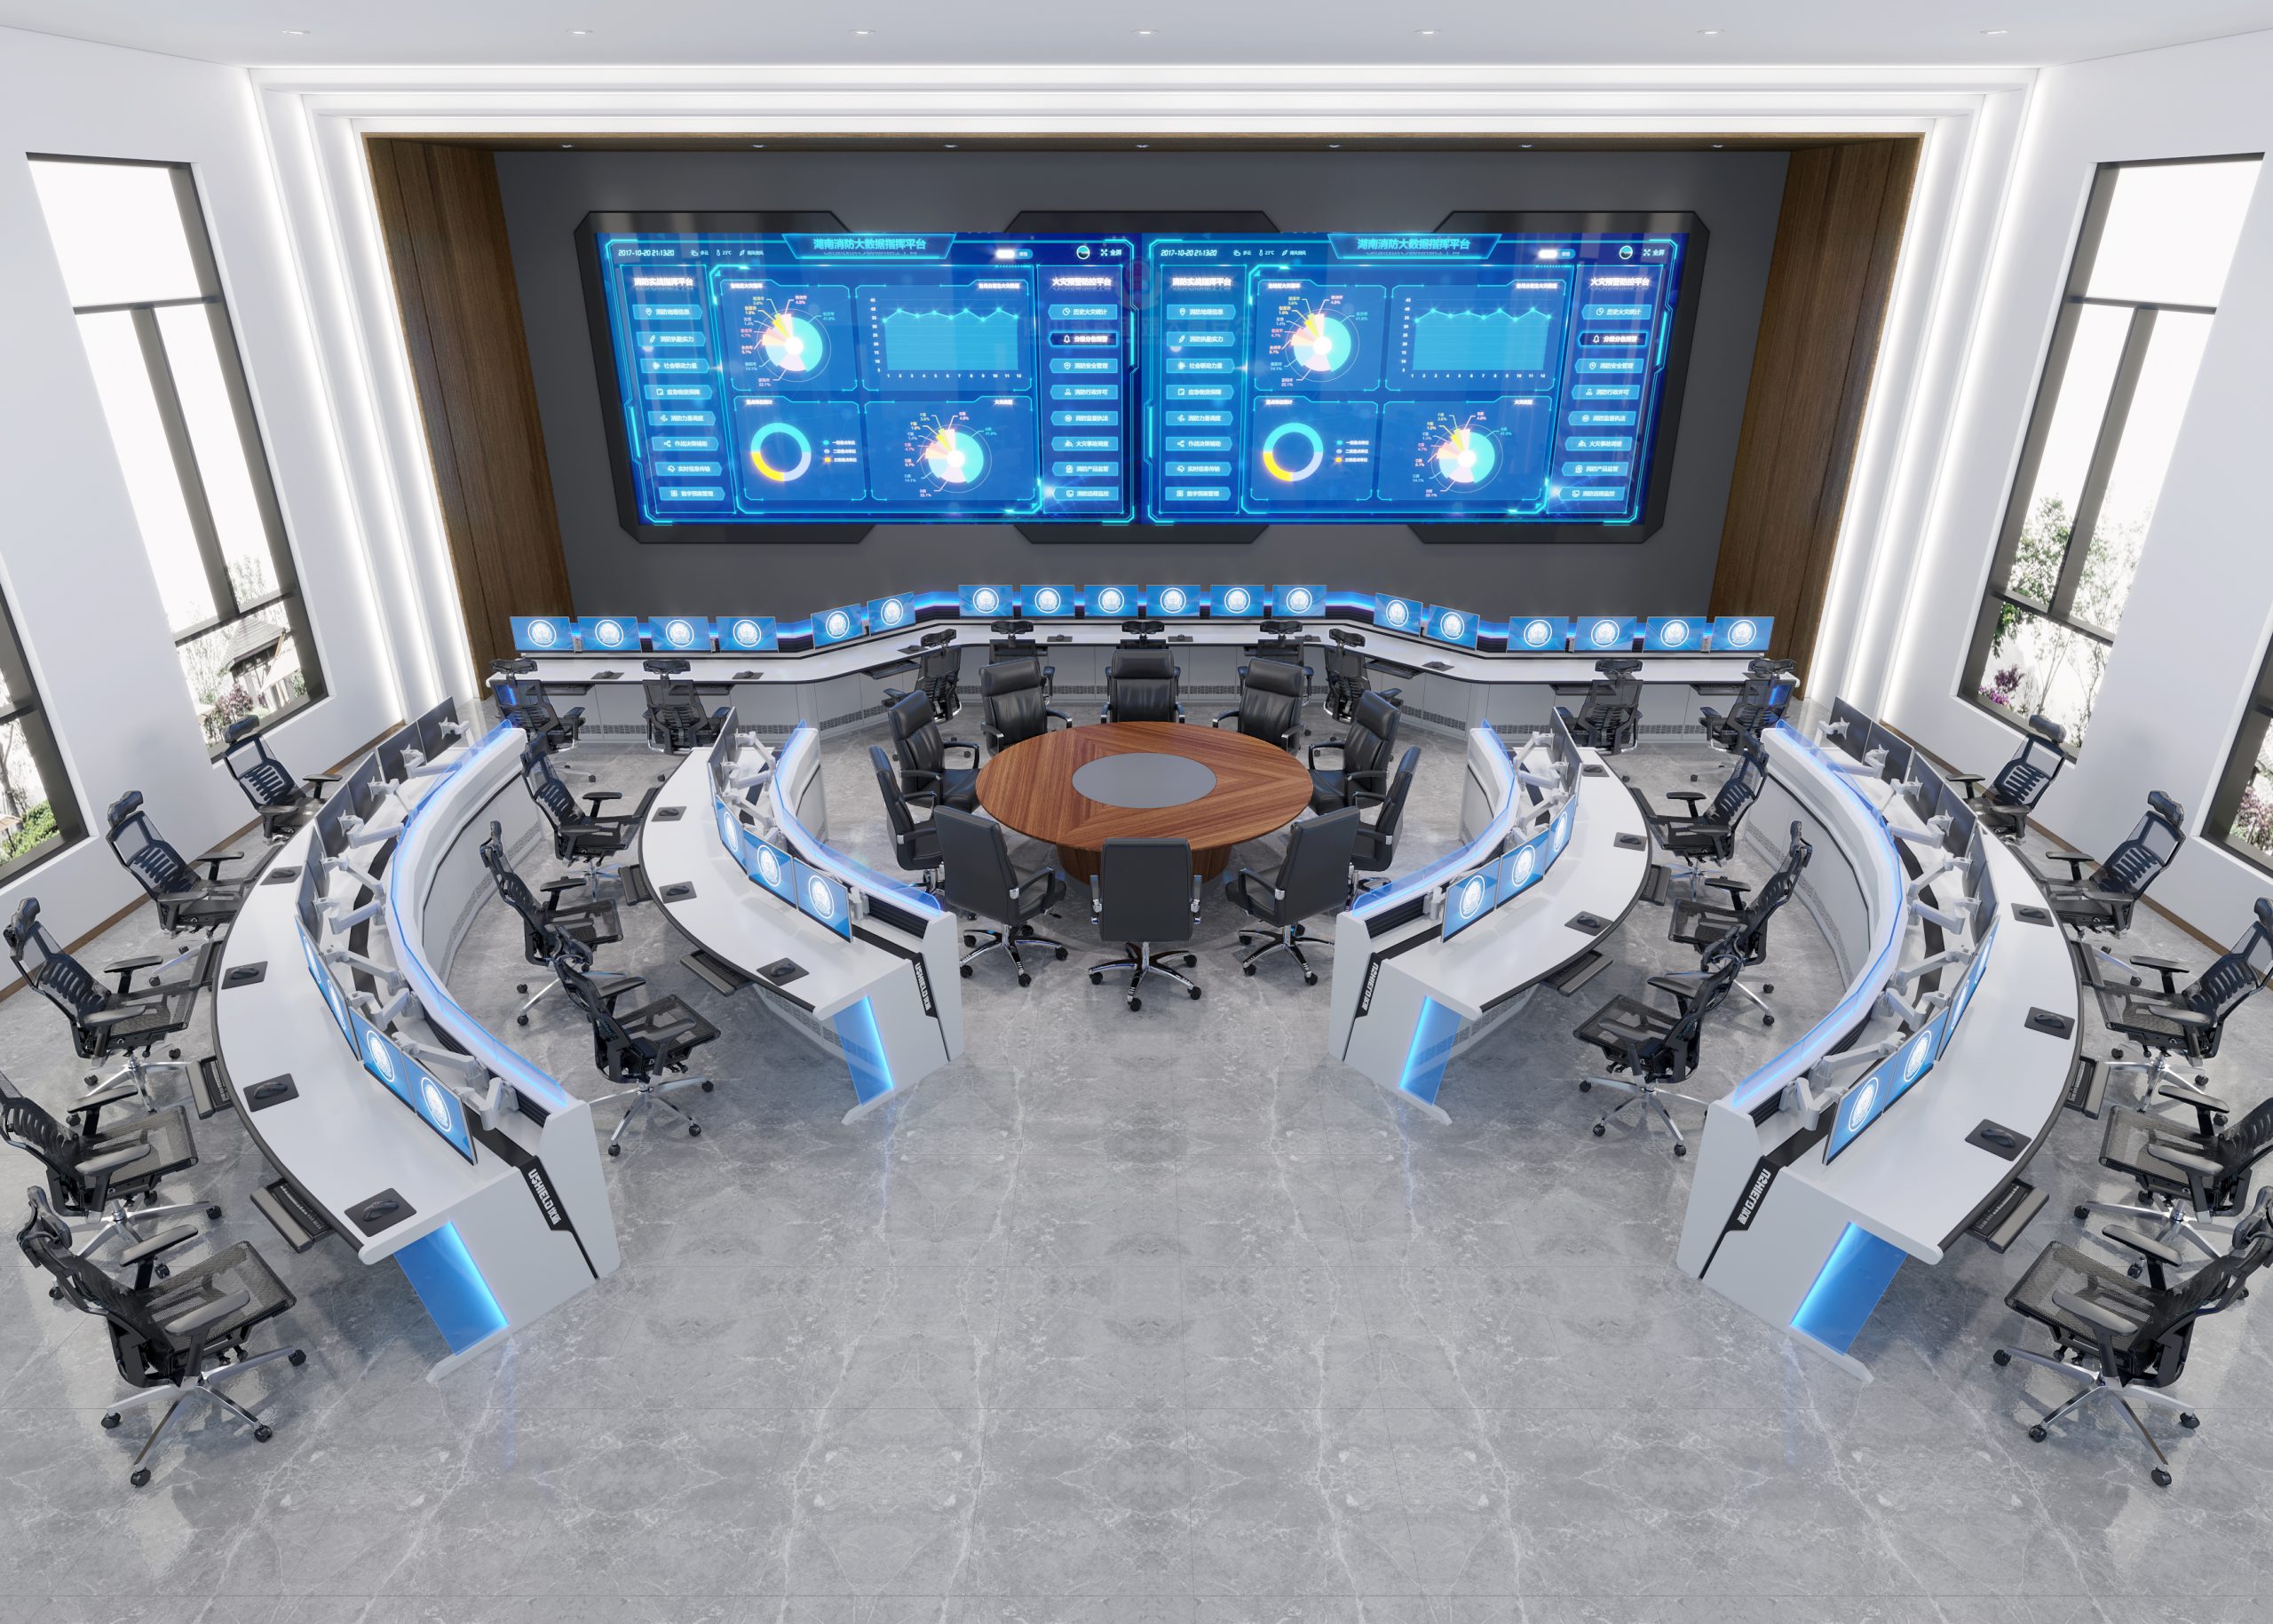 Workstation Desk Control Room Consoles: Organizing Your Control Room Space